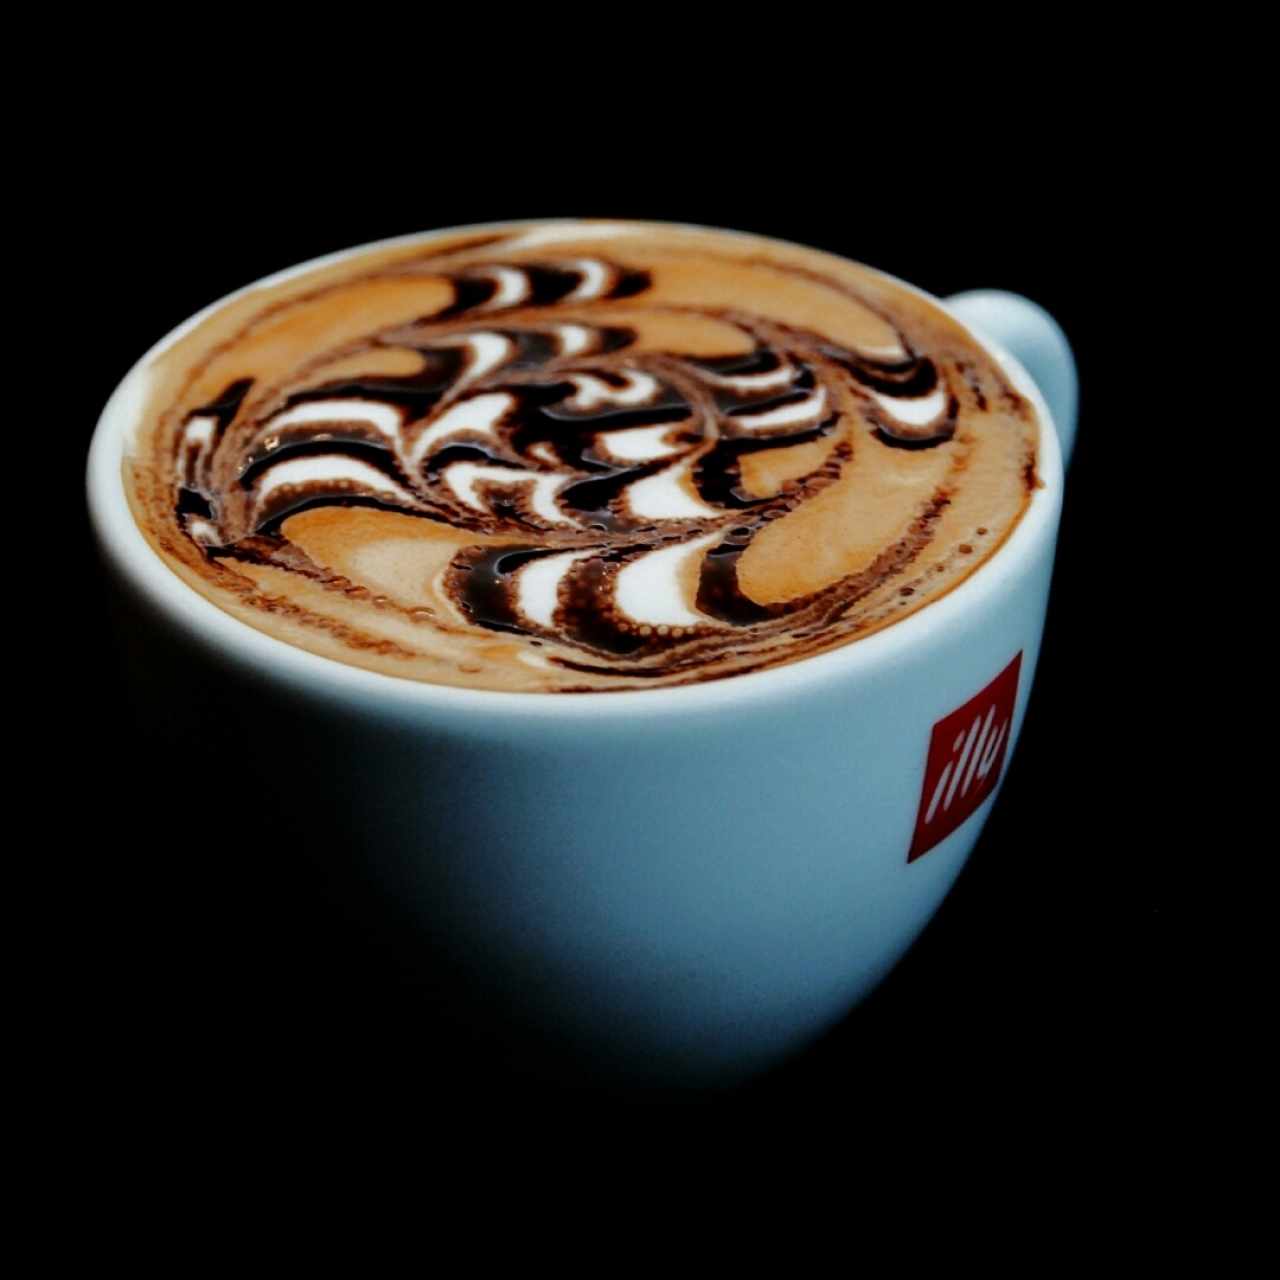 illy Coffee 